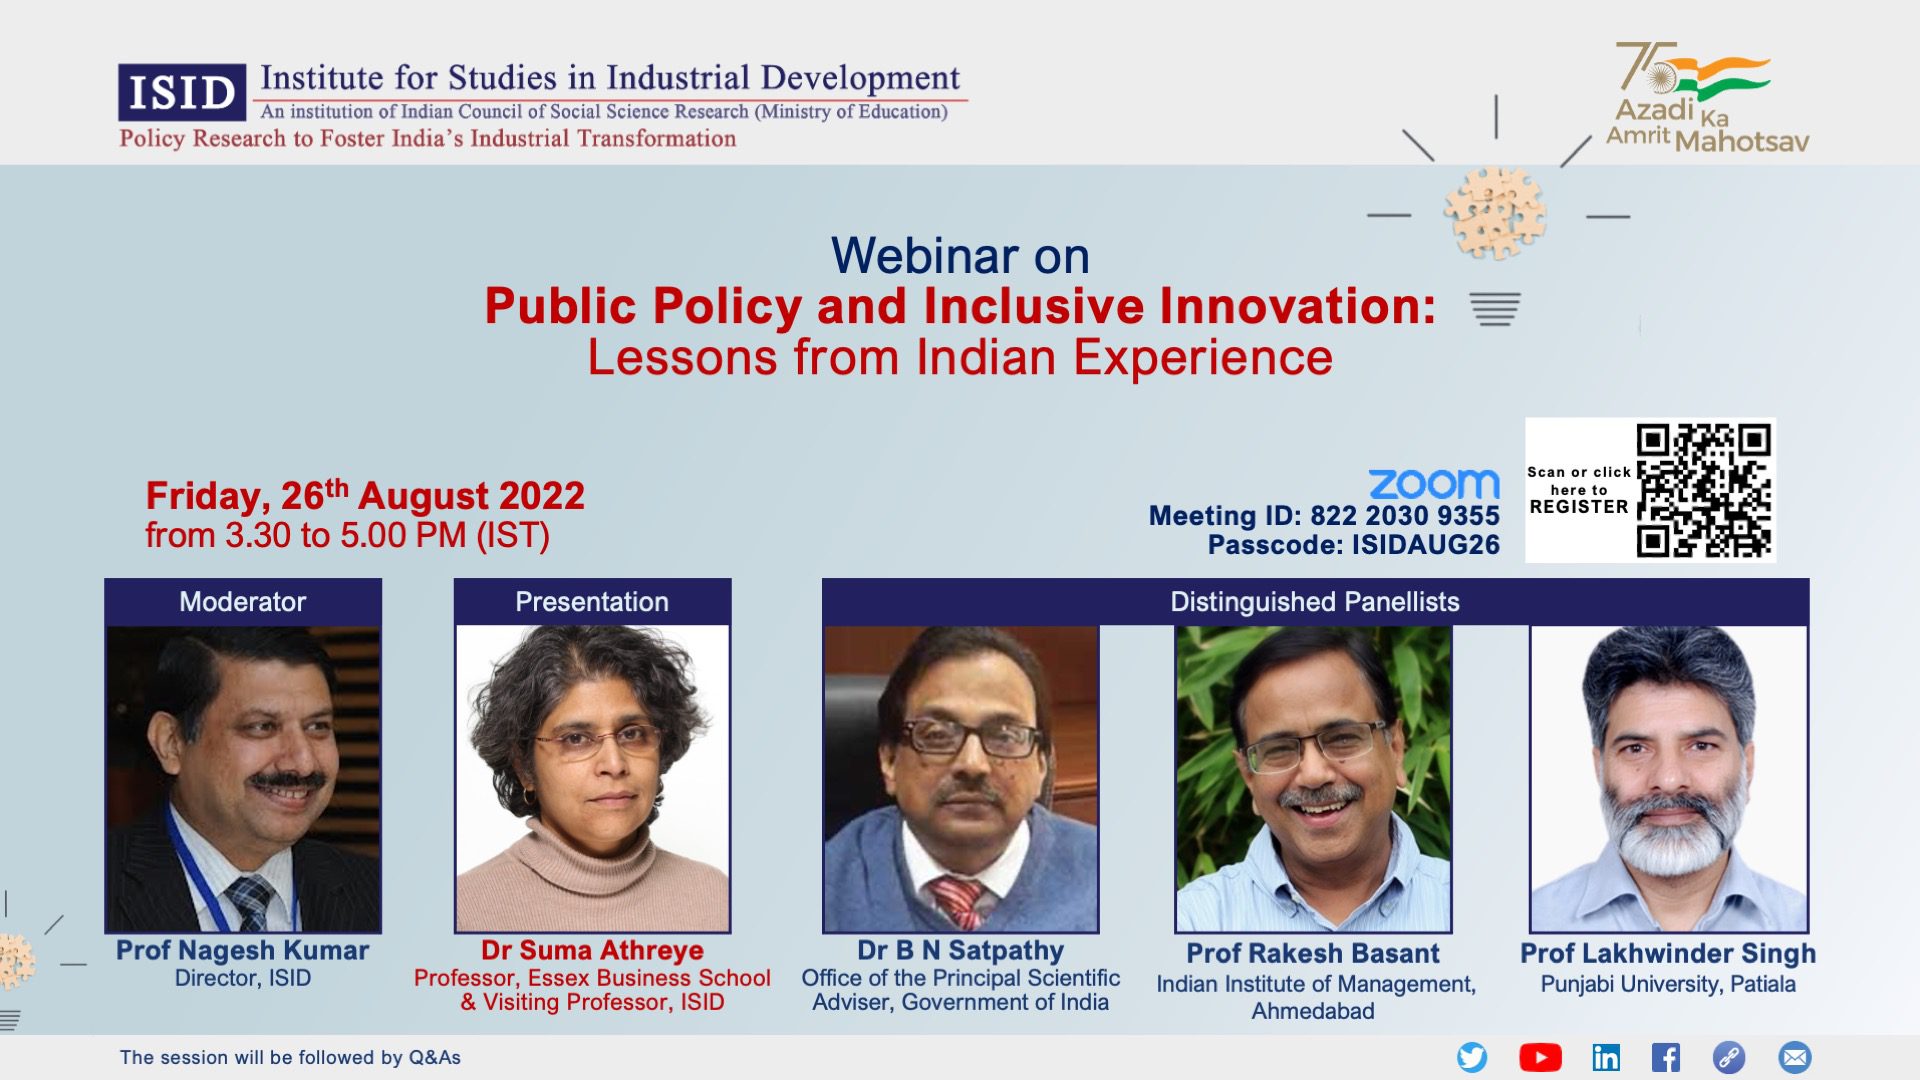 ISID Webinar on Public Policy and Inclusive Innovation: Lessons from Indian Experience